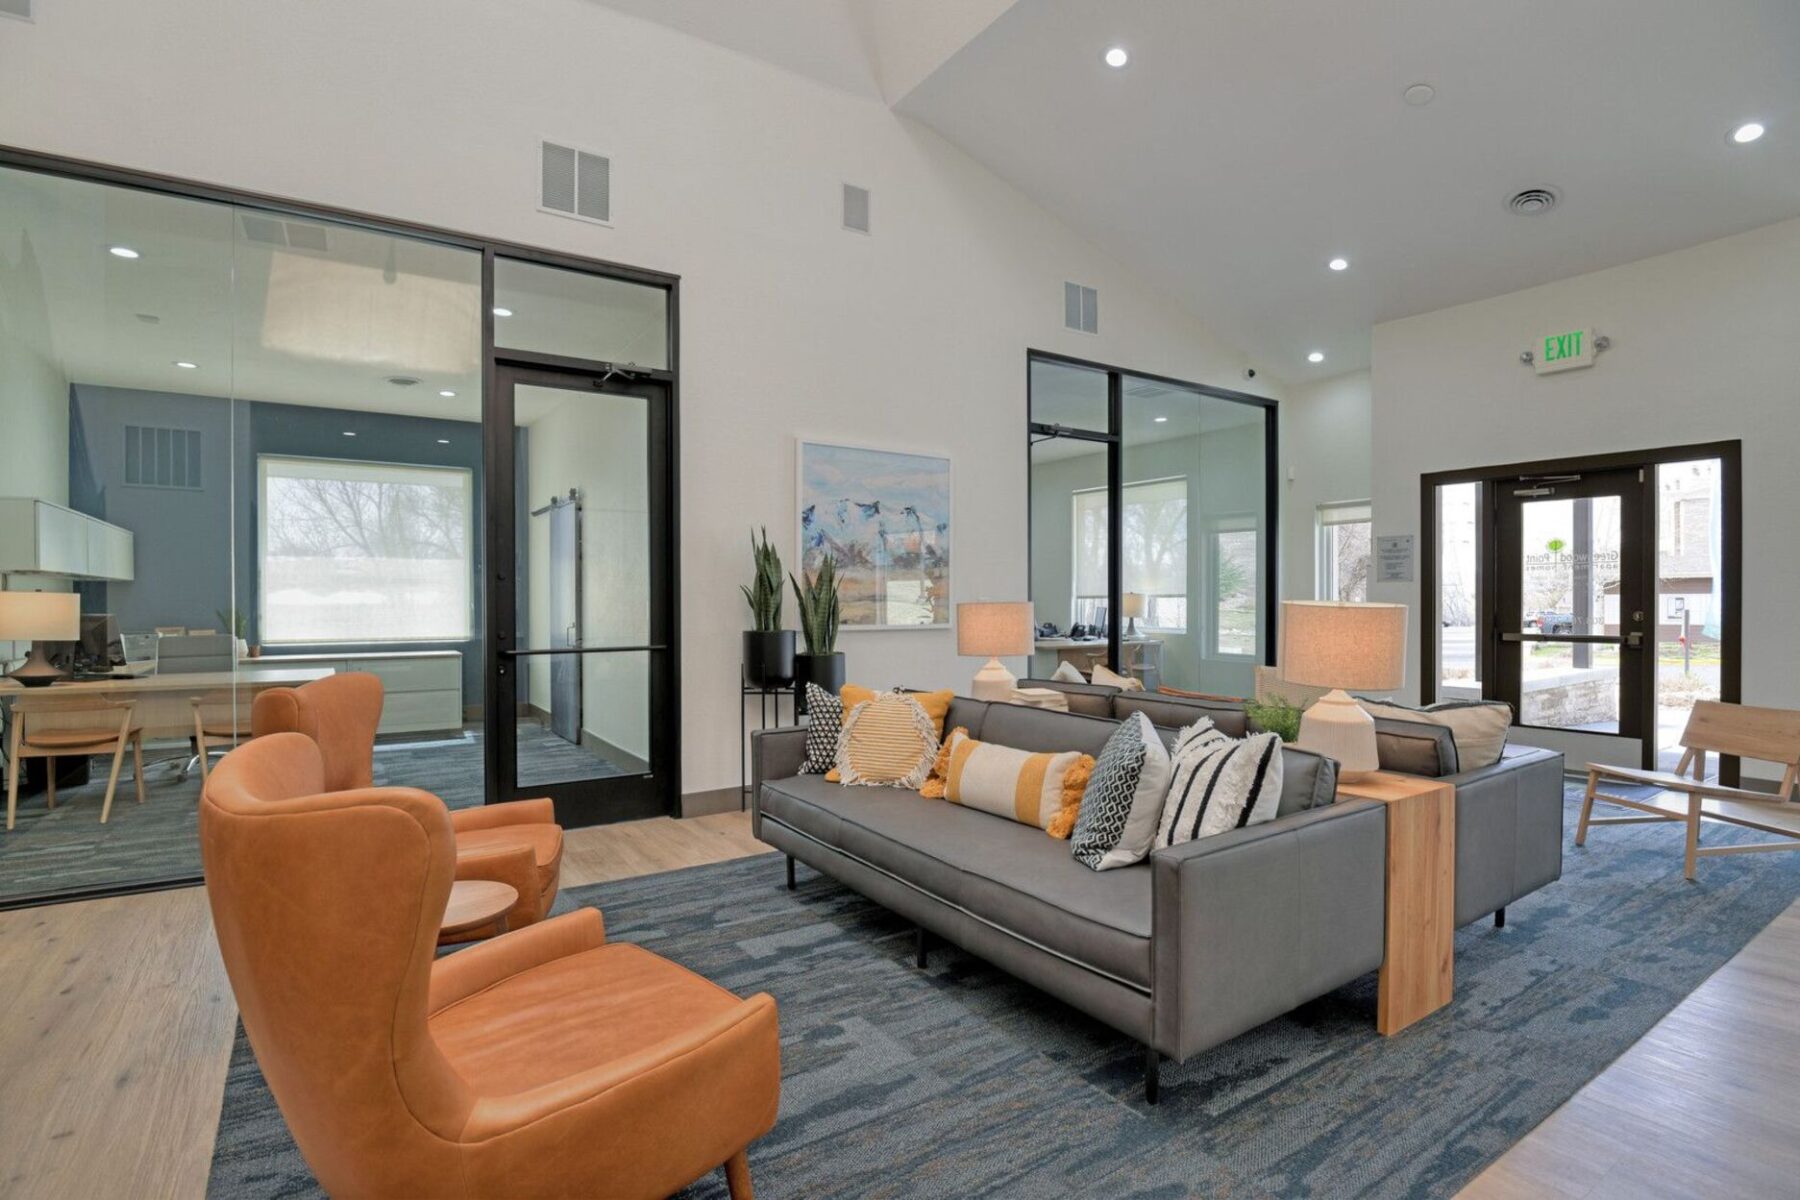 Leasing office waiting area with couches and chairs and private employee offices in the back